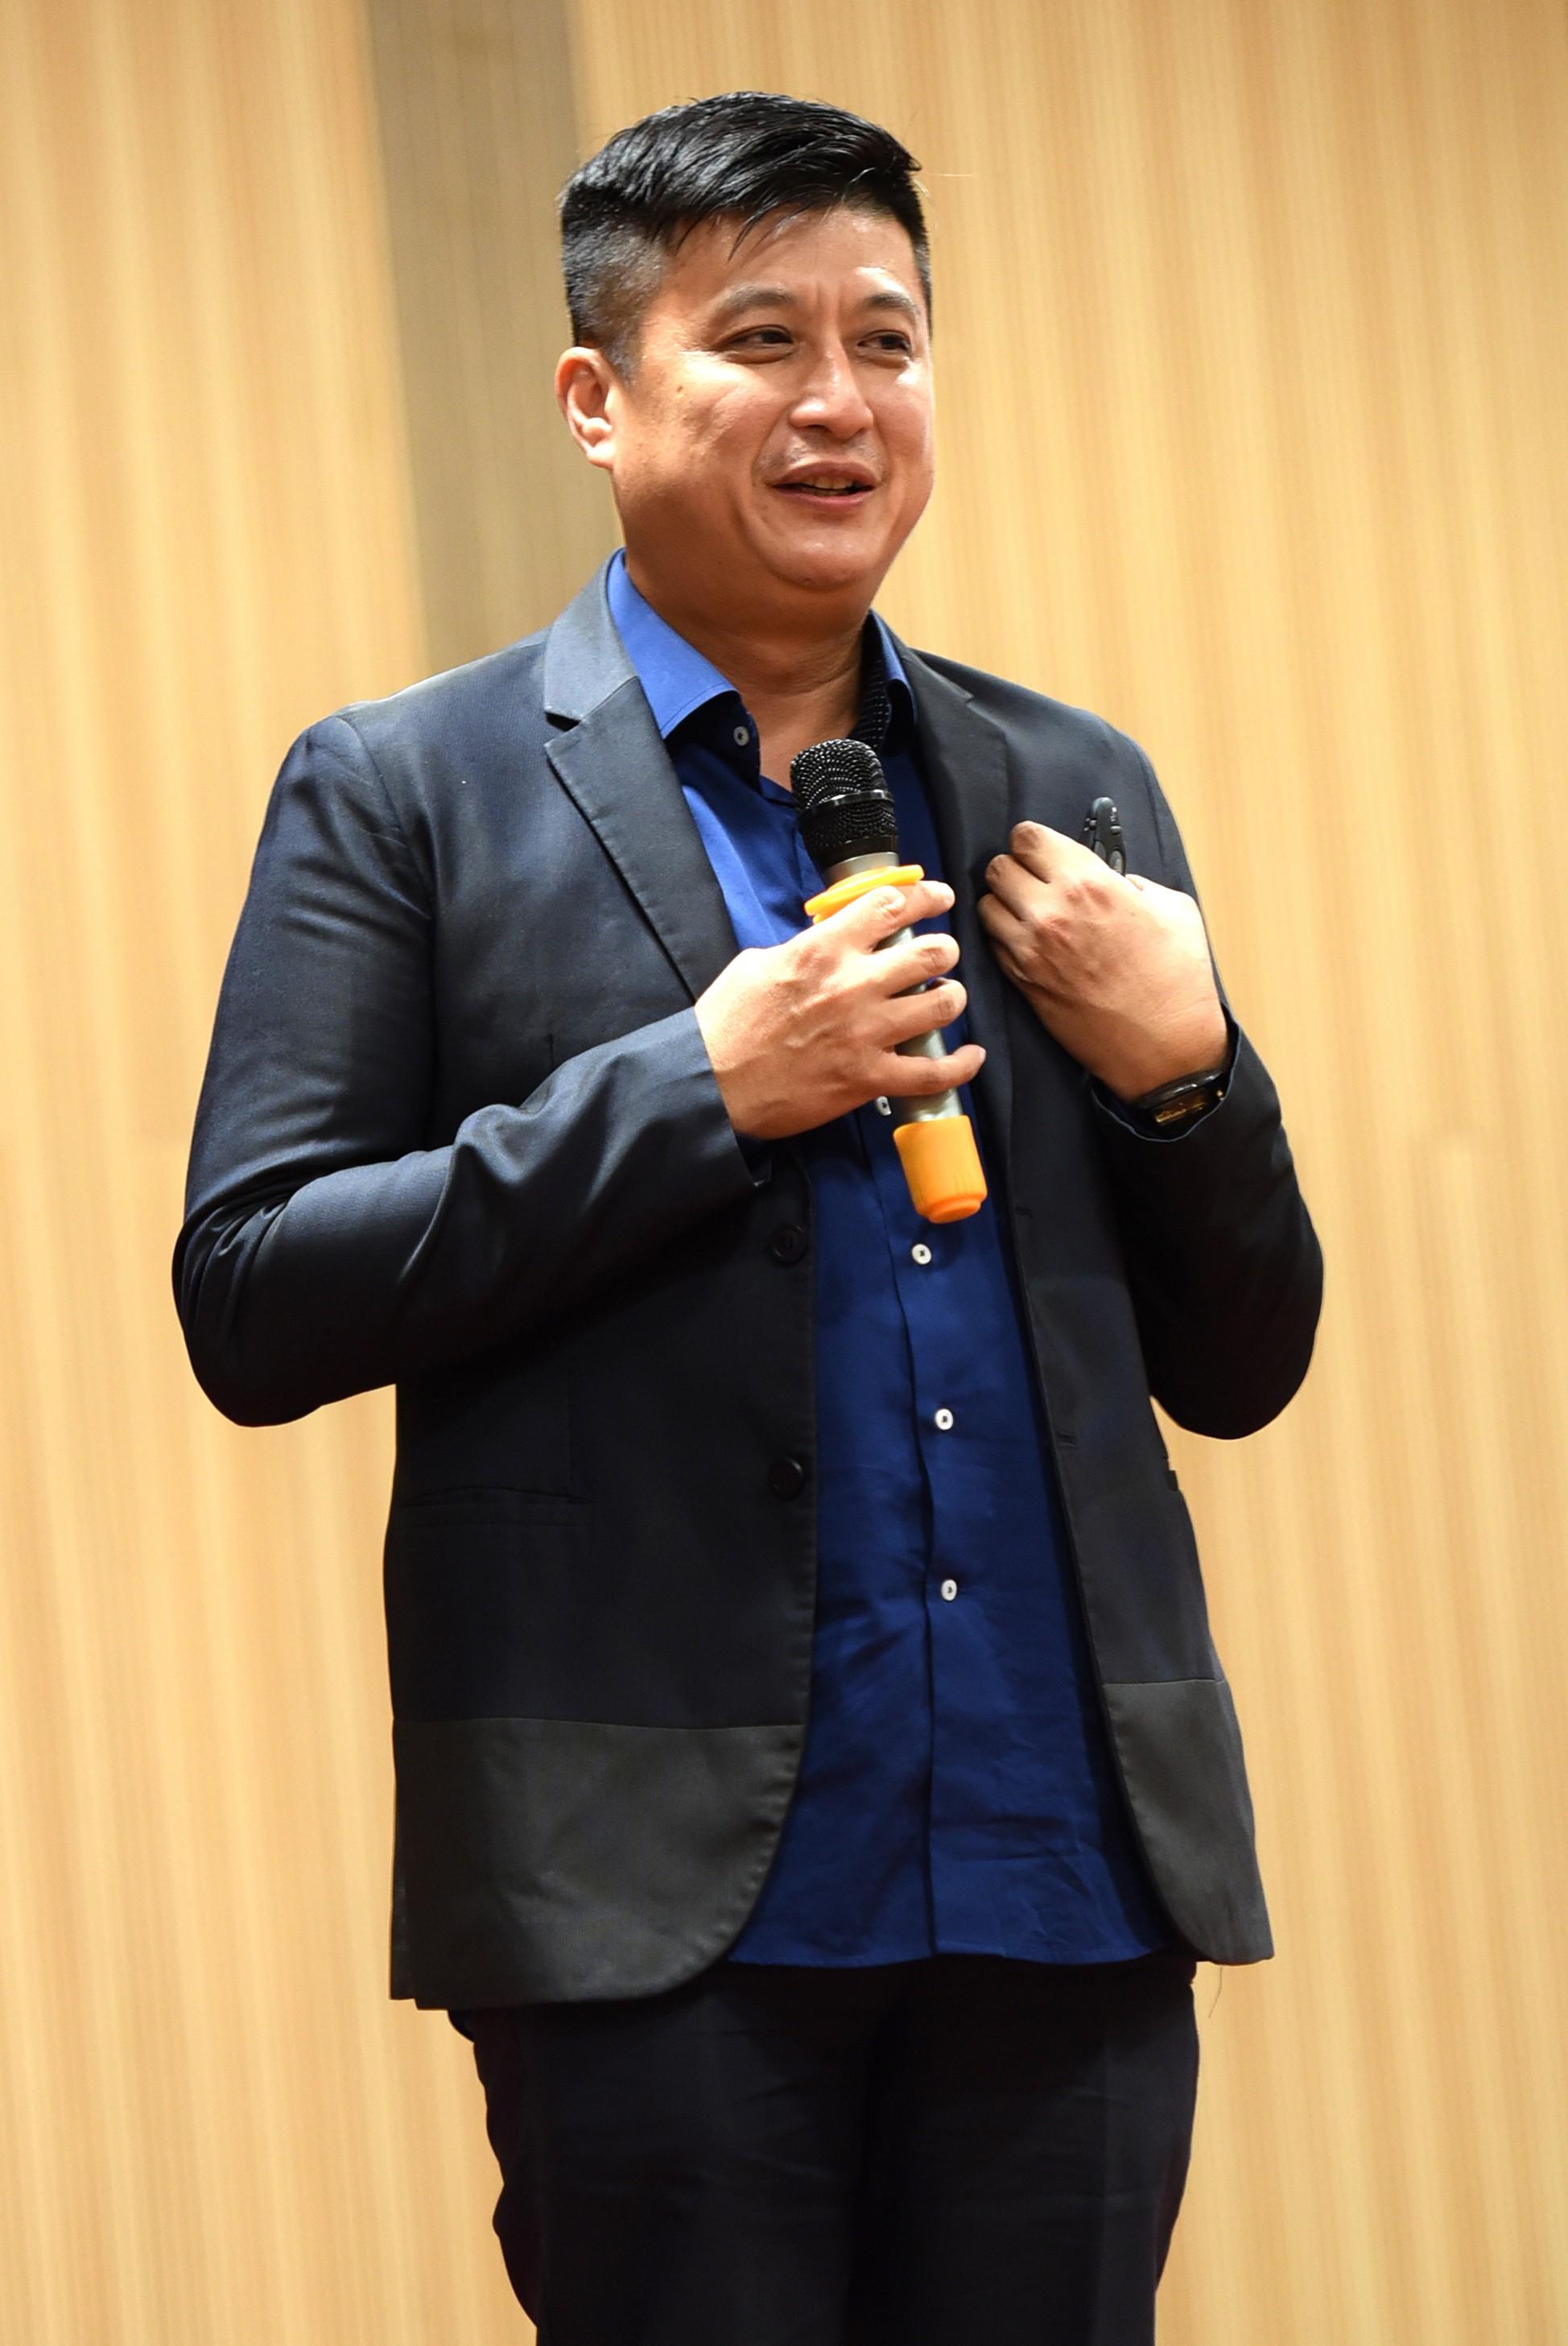 Old Town Group Co-Founder-cum-MeCan Mall Founder Andy Goh Ching Mun